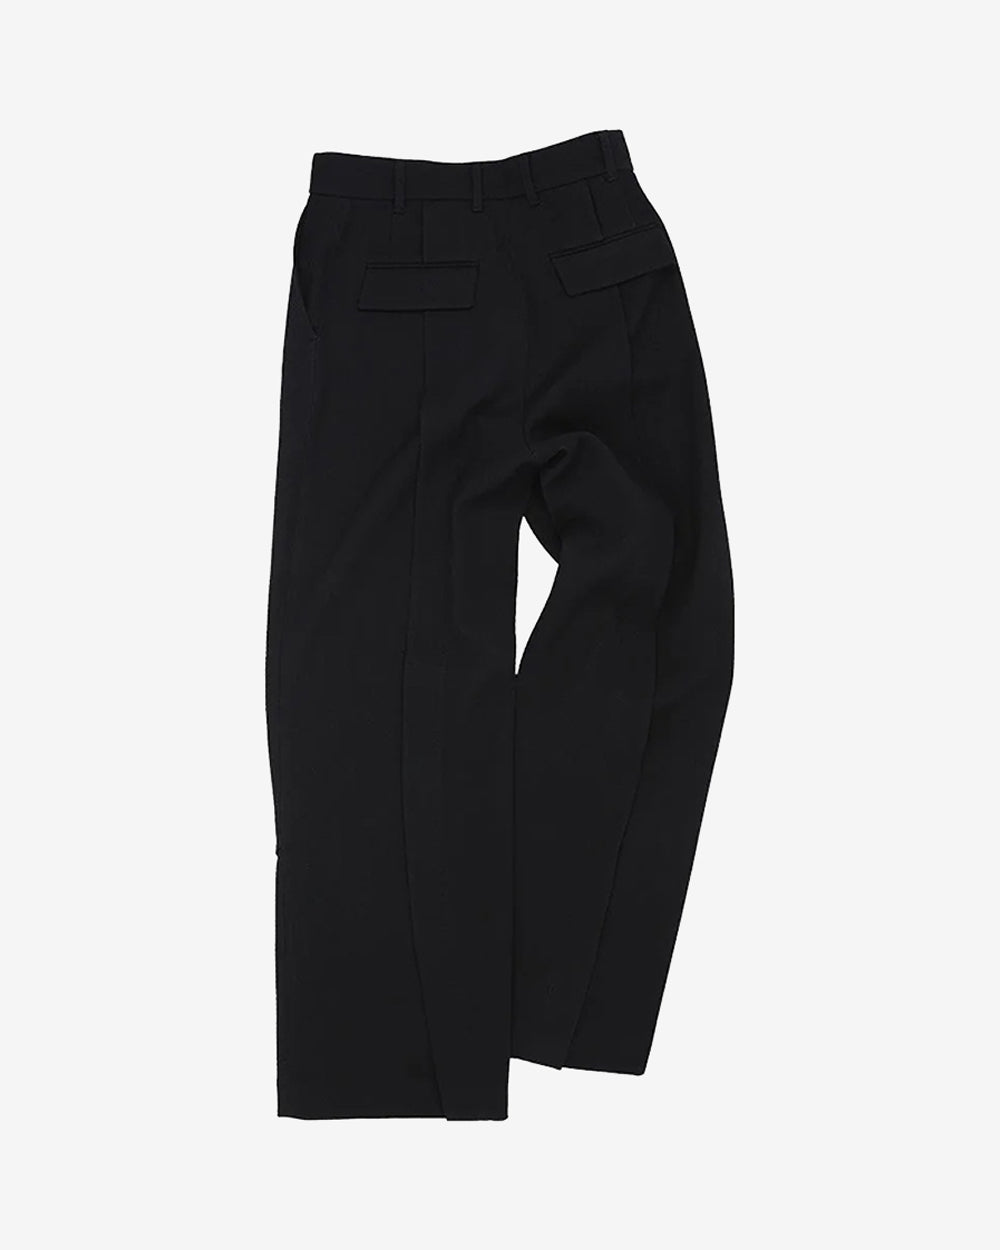 Camtton Twill Wool Trousers